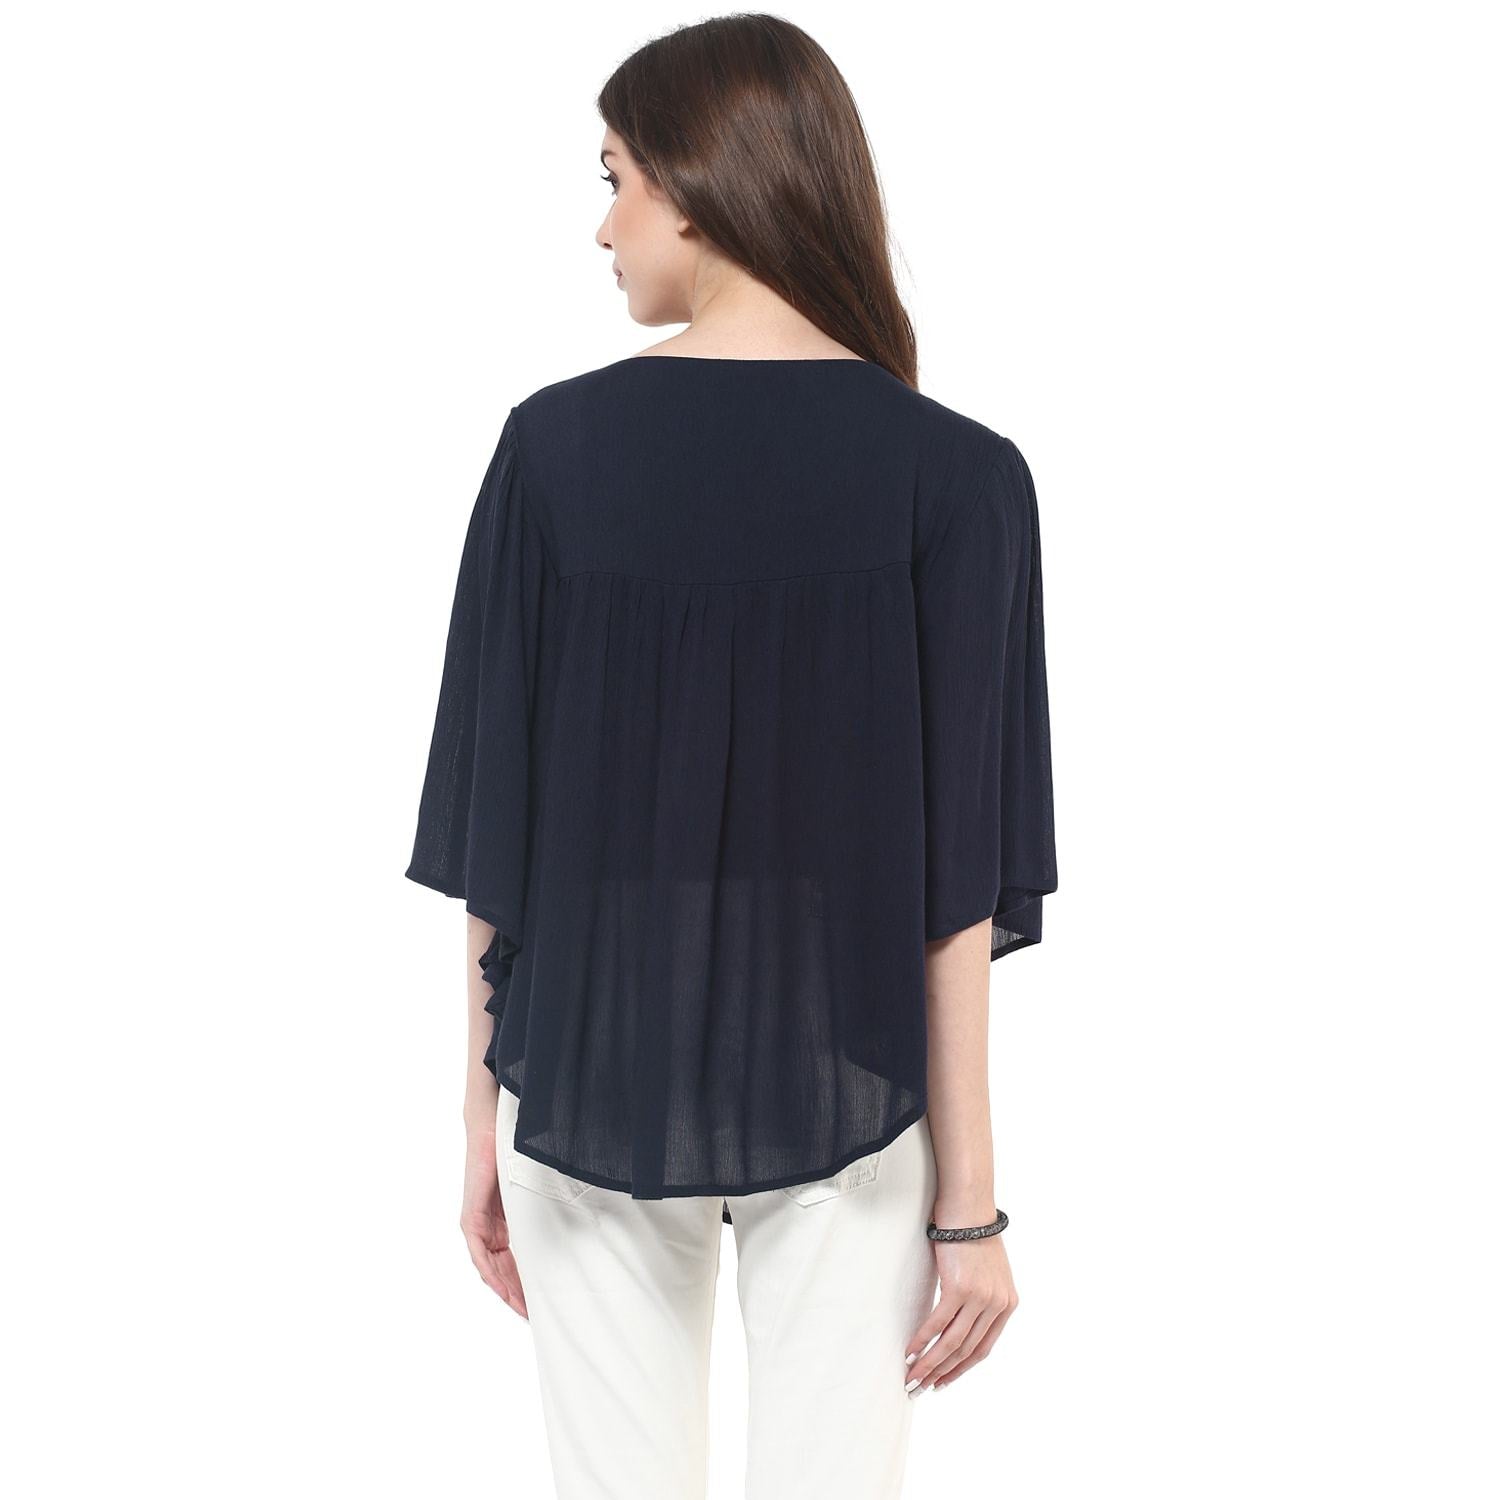 Women's Navy Flare Solid Top - Pannkh